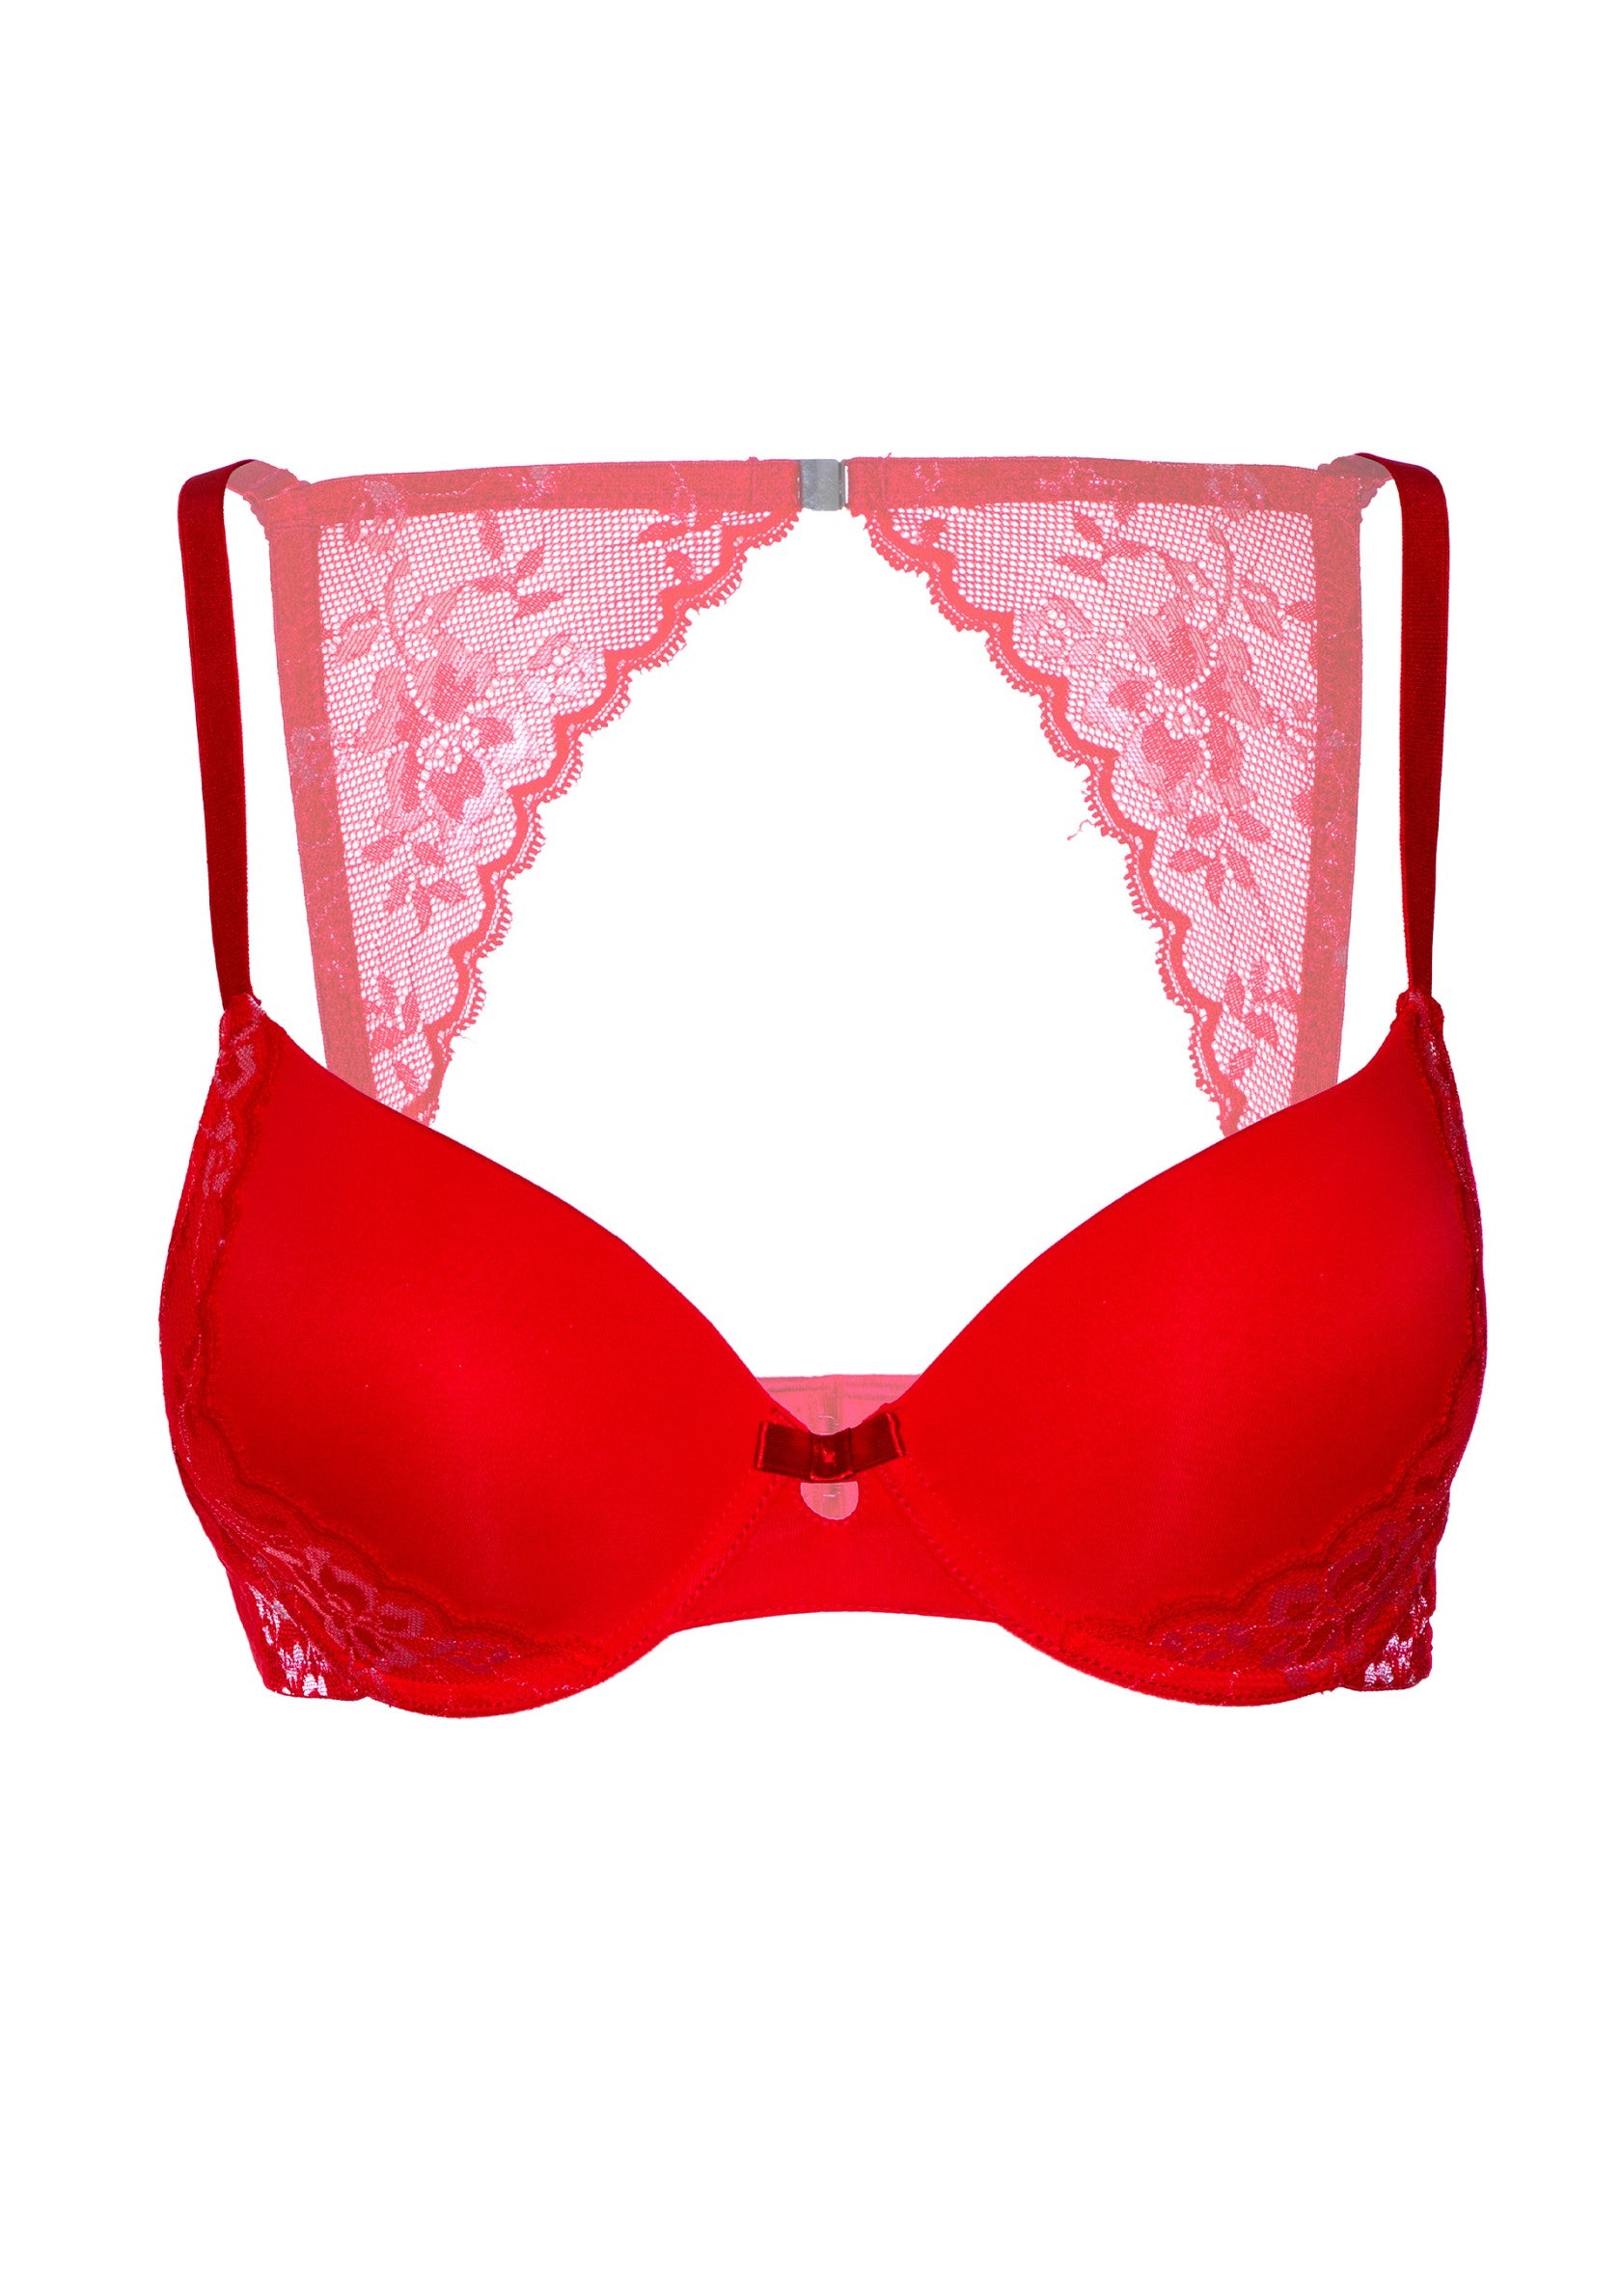 Daring Intimates Mix & Match Push-up bra with lace racerback RED 75B - 4